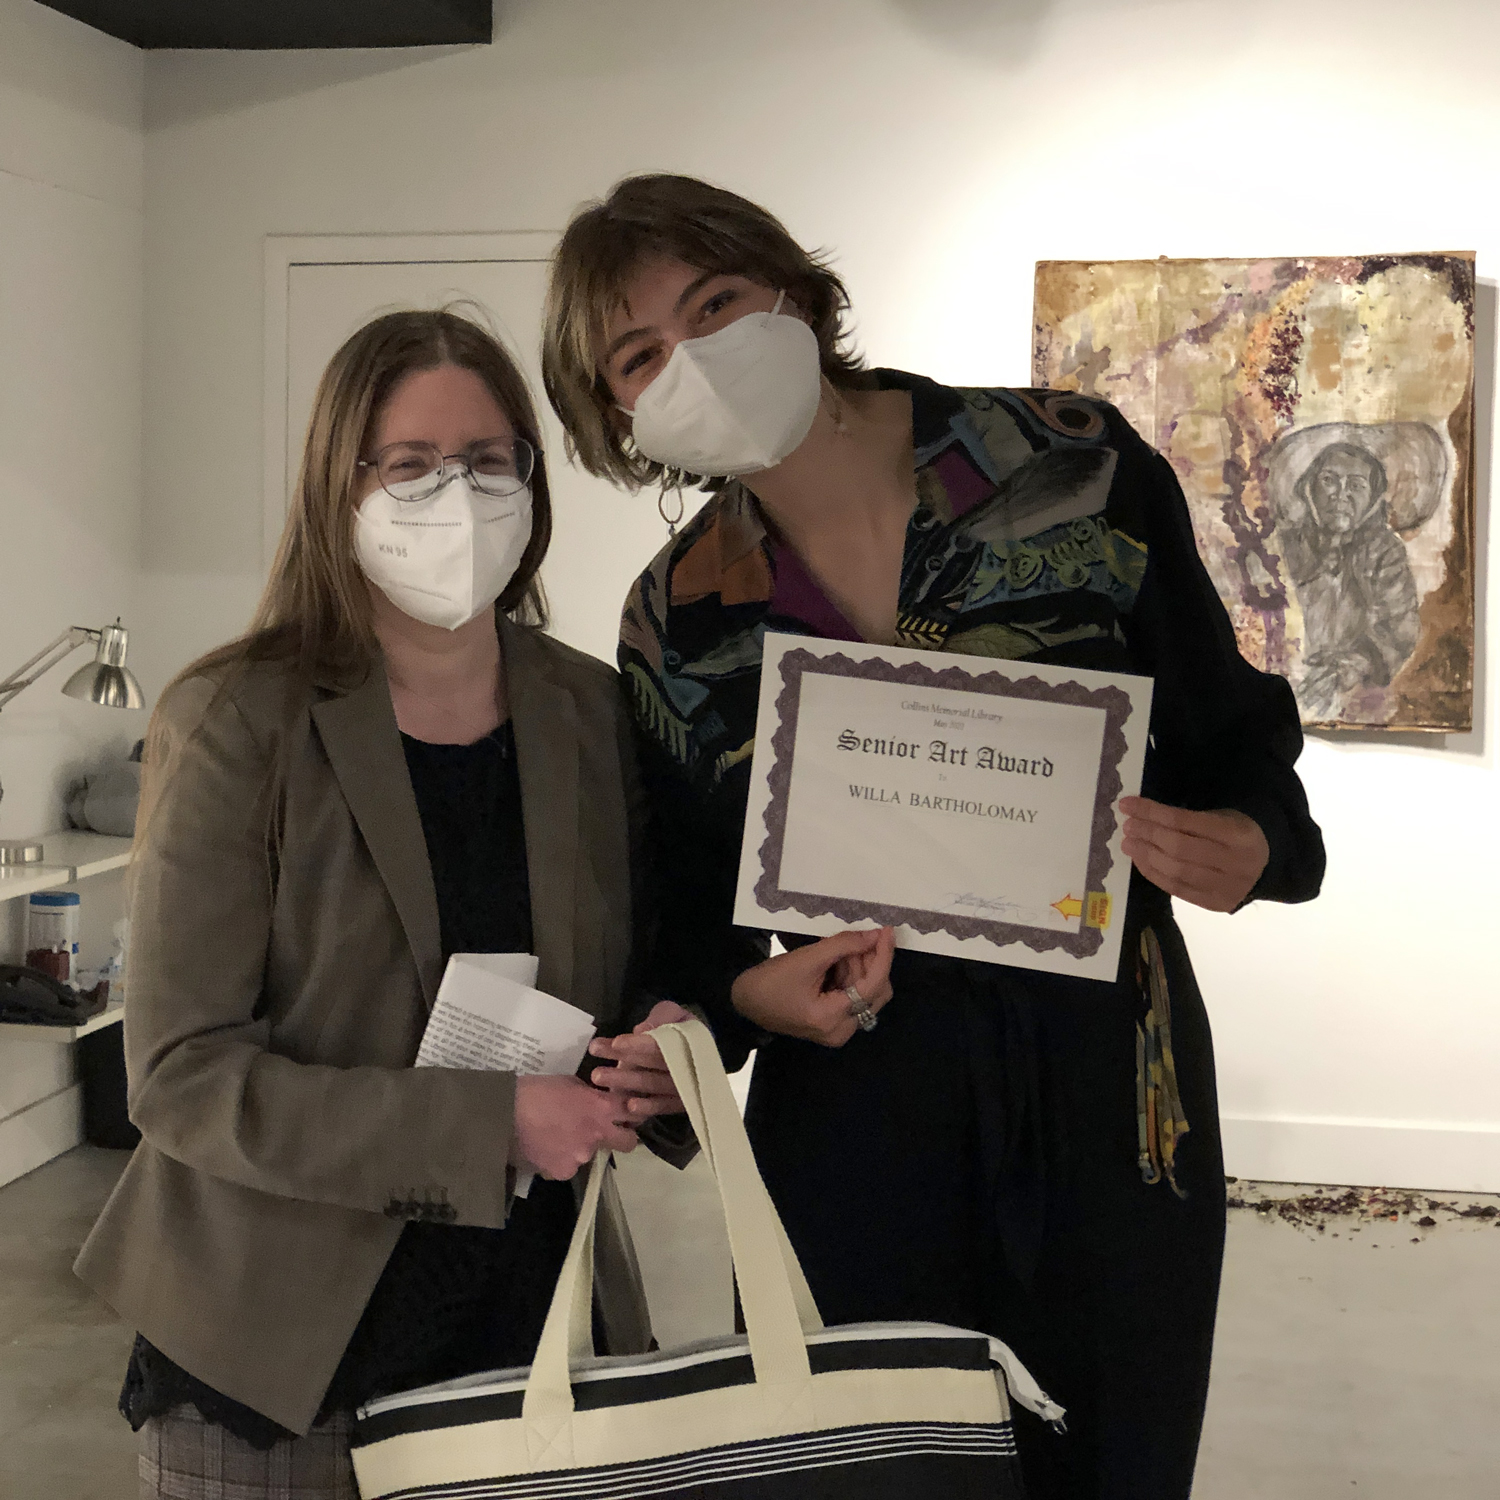 Two people in a gallery wearing face masks